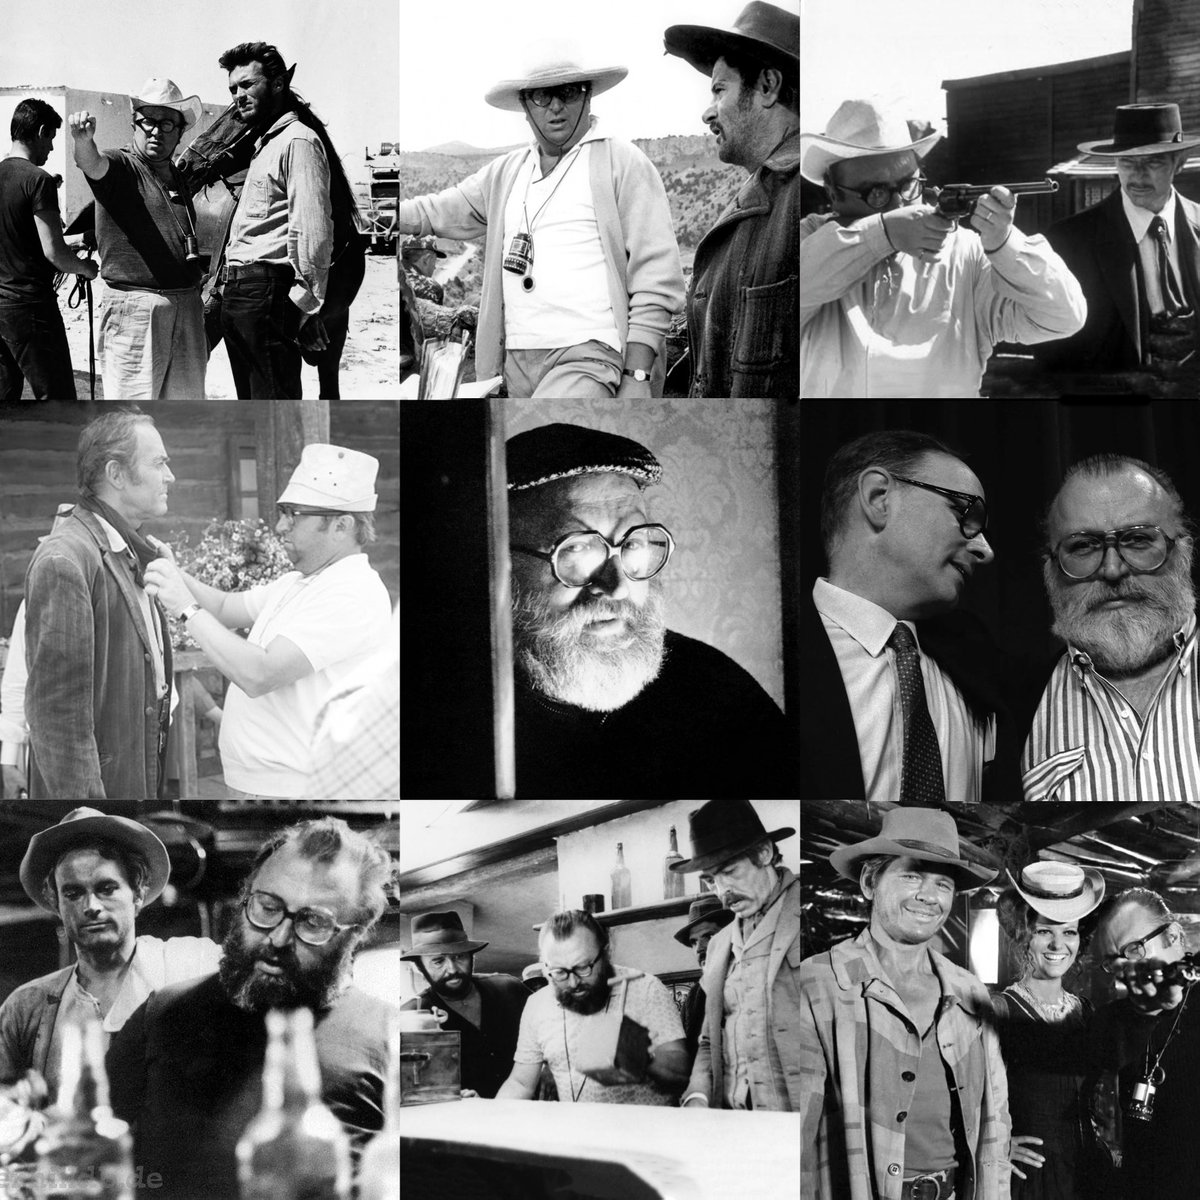 On this day 1989 we sadly lost the legend that is Sergio Leone who to this day, still makes my life a little brighter. Shine on Sergio 📷 #sergioleone #RIP #moviedirector #italian #italiandirector #afistfulofdollars #forafewdollarsmore #thegoodthebadandtheugly #shineon